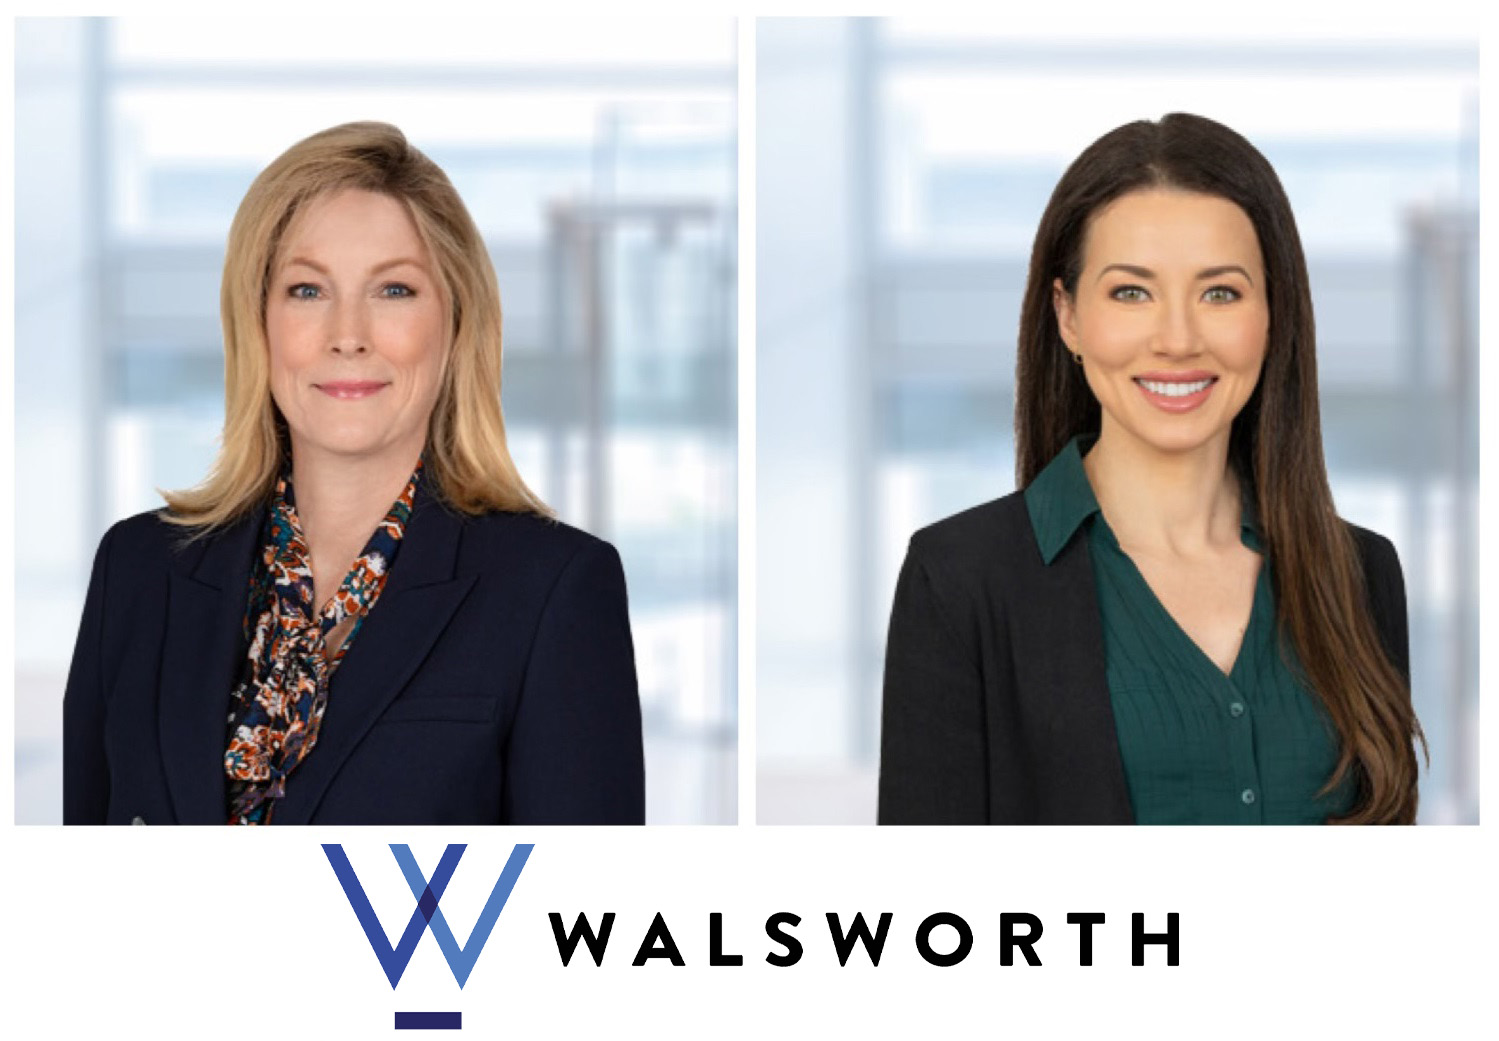 Post Thumbnail for Walsworth Attorneys Secure Major Defense Arbitration Award in Complicated Employment Matter